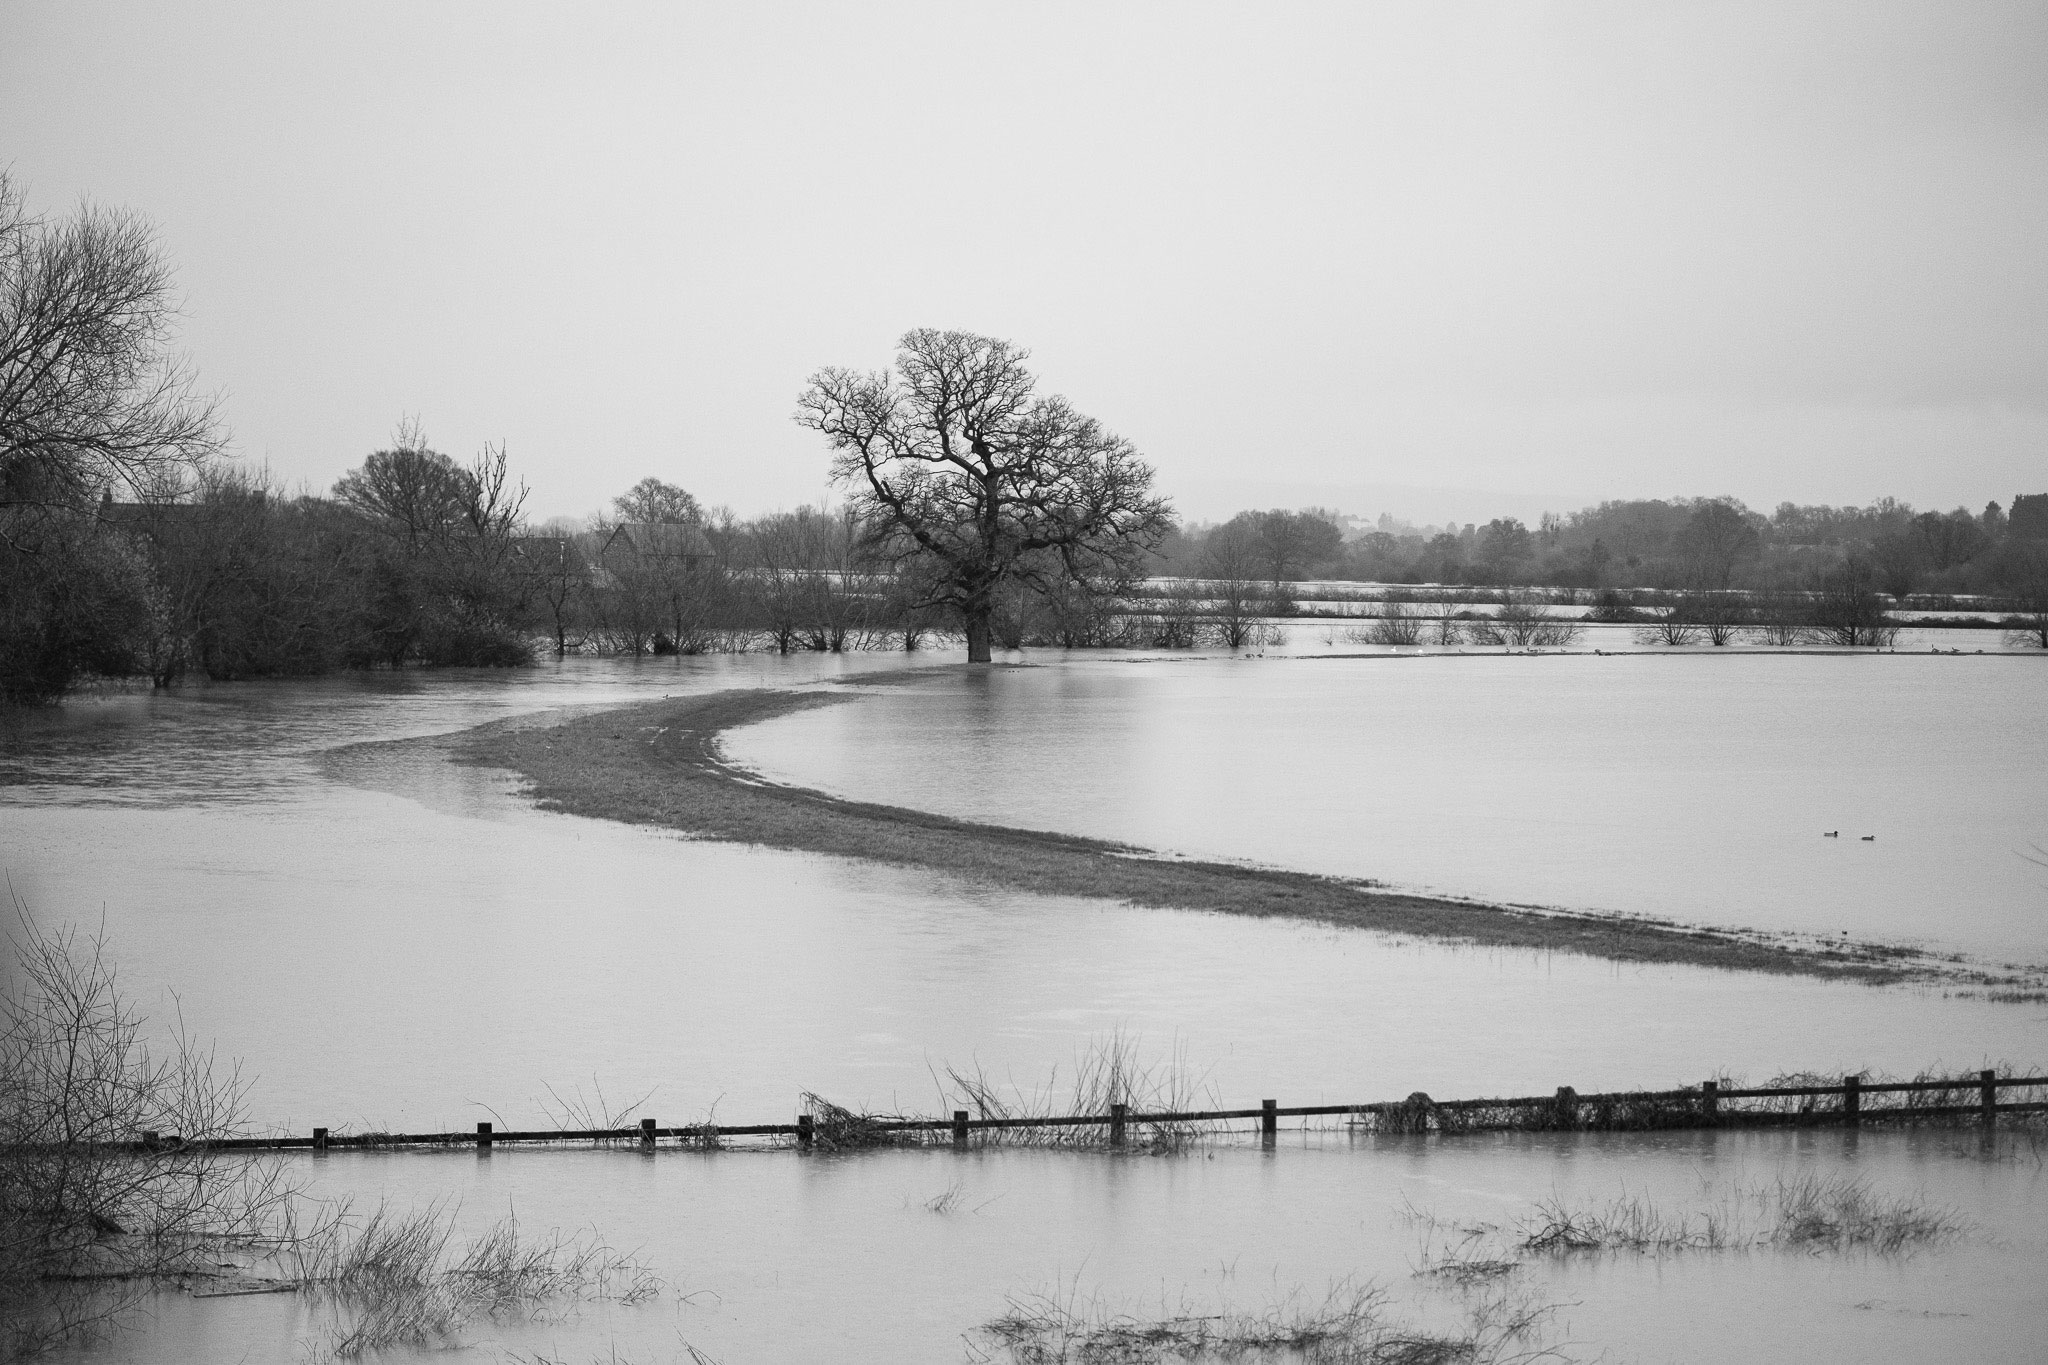 Flooding at Haw Bridge on the River Severn